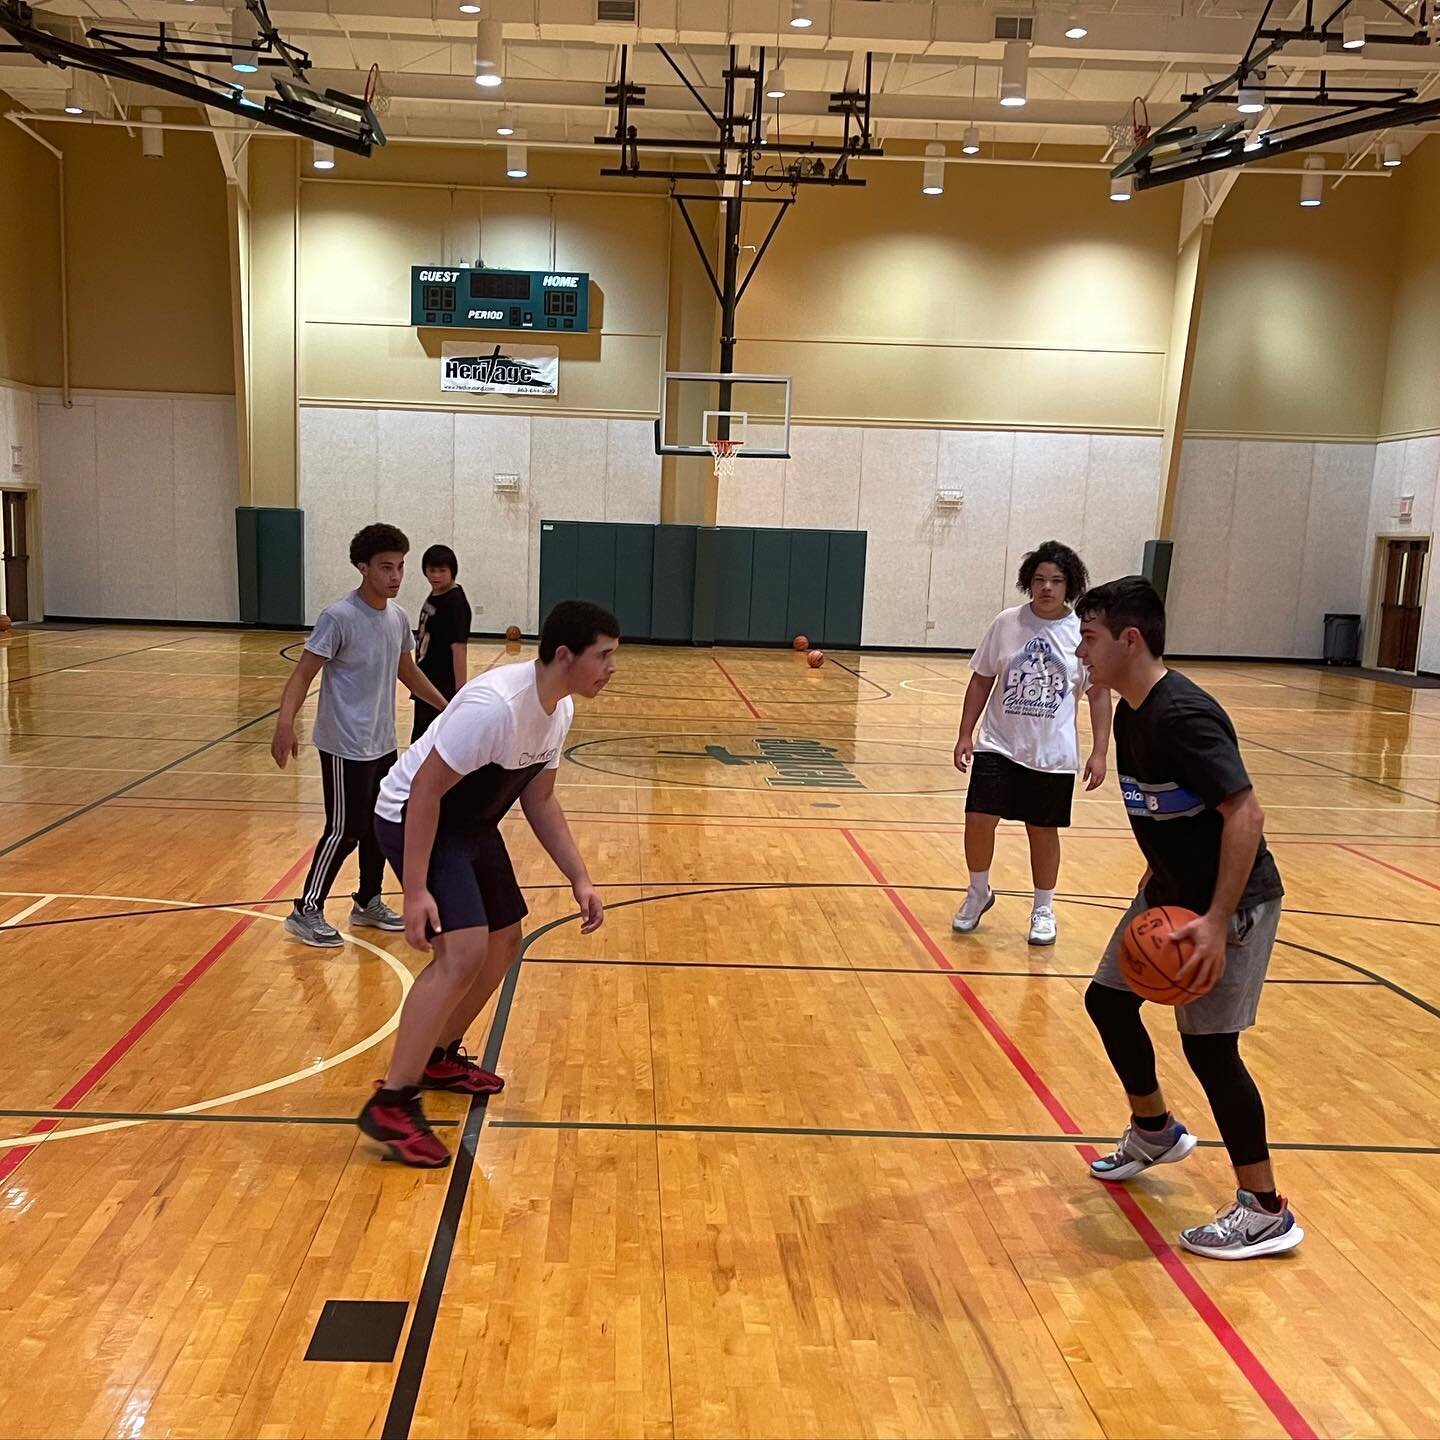 Students had yesterday off in honor of Presidents&rsquo; Day, so the Leverage staff picked up our Breakfast Club boys for a day of basketball. 🏀 

Thanks to @hbclakeland for allowing Leverage Ministries to use the gym!